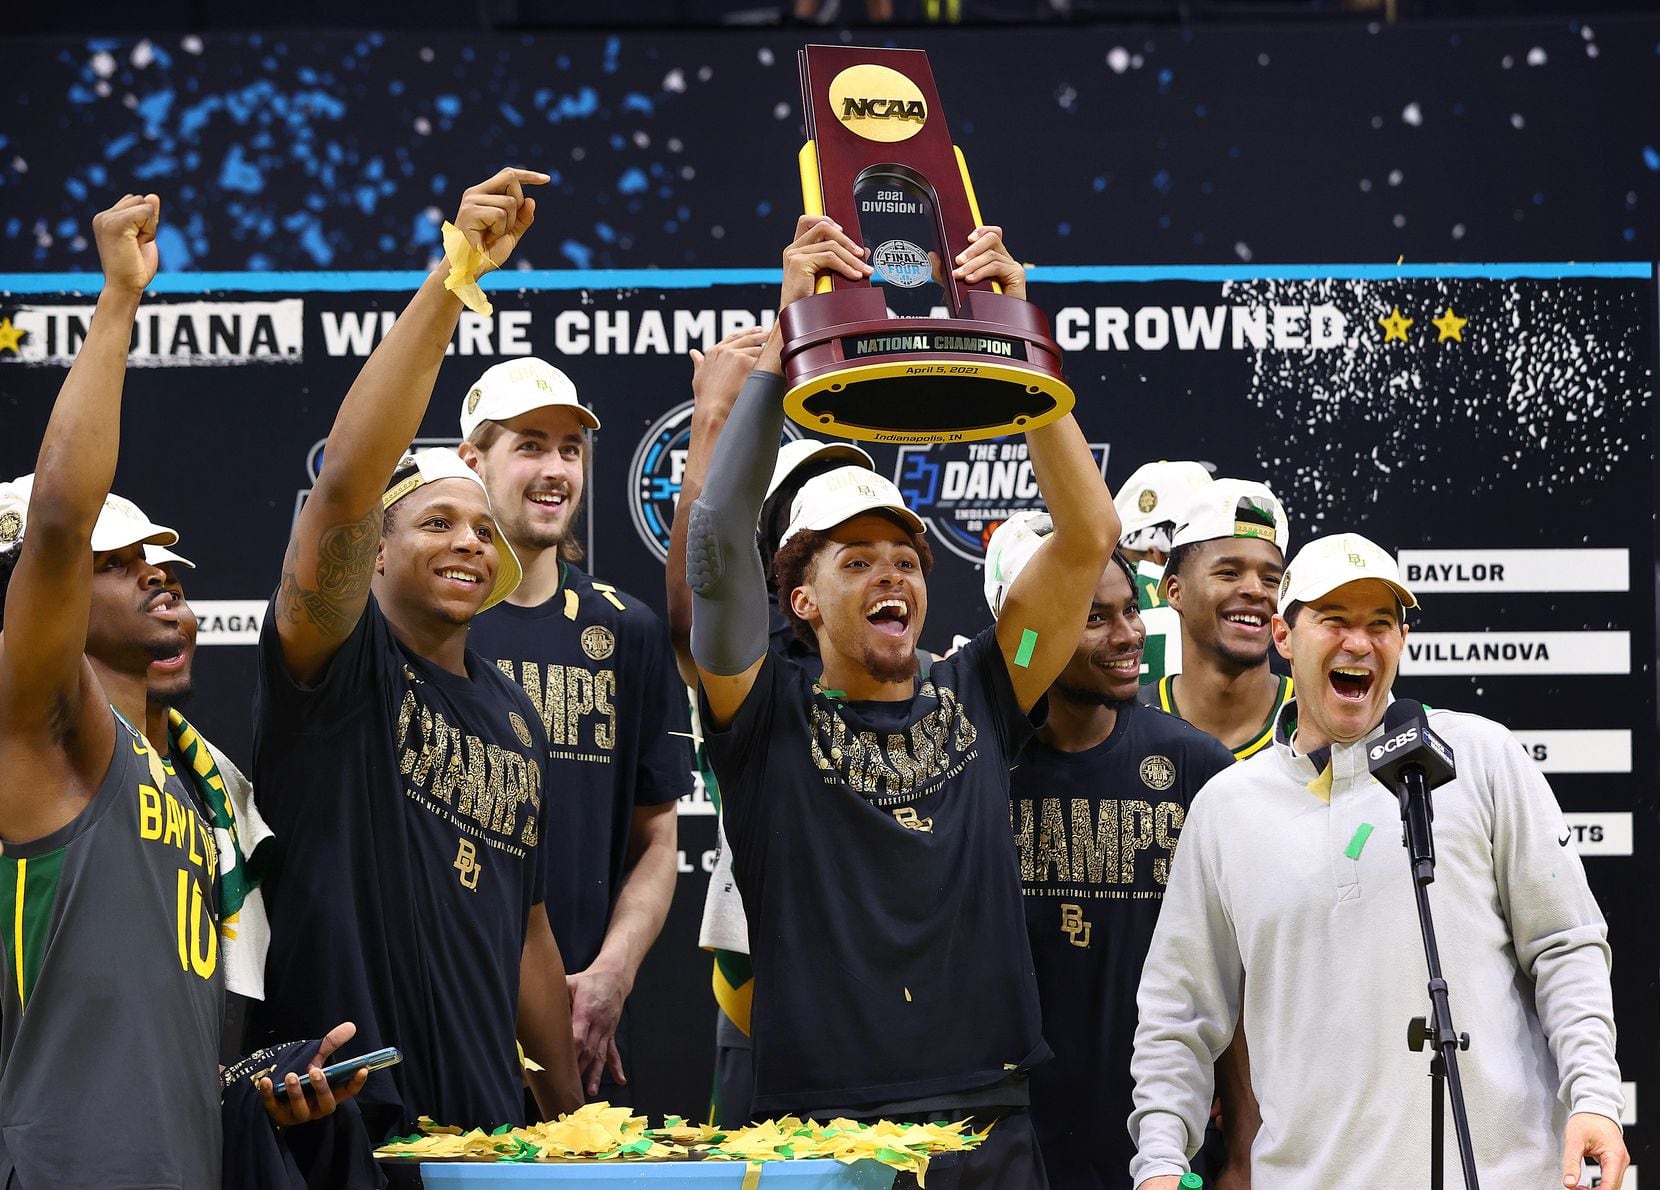 INDIANAPOLIS, INDIANA - APRIL 05: The Baylor Bears celebrate with the trophy after their win against the Gonzaga Bulldogs in the National Championship game of the 2021 NCAA Men's Basketball Tournament at Lucas Oil Stadium on April 05, 2021 in Indianapolis, Indiana. (Photo by Jamie Schwaberow/NCAA Photos via Getty Images)